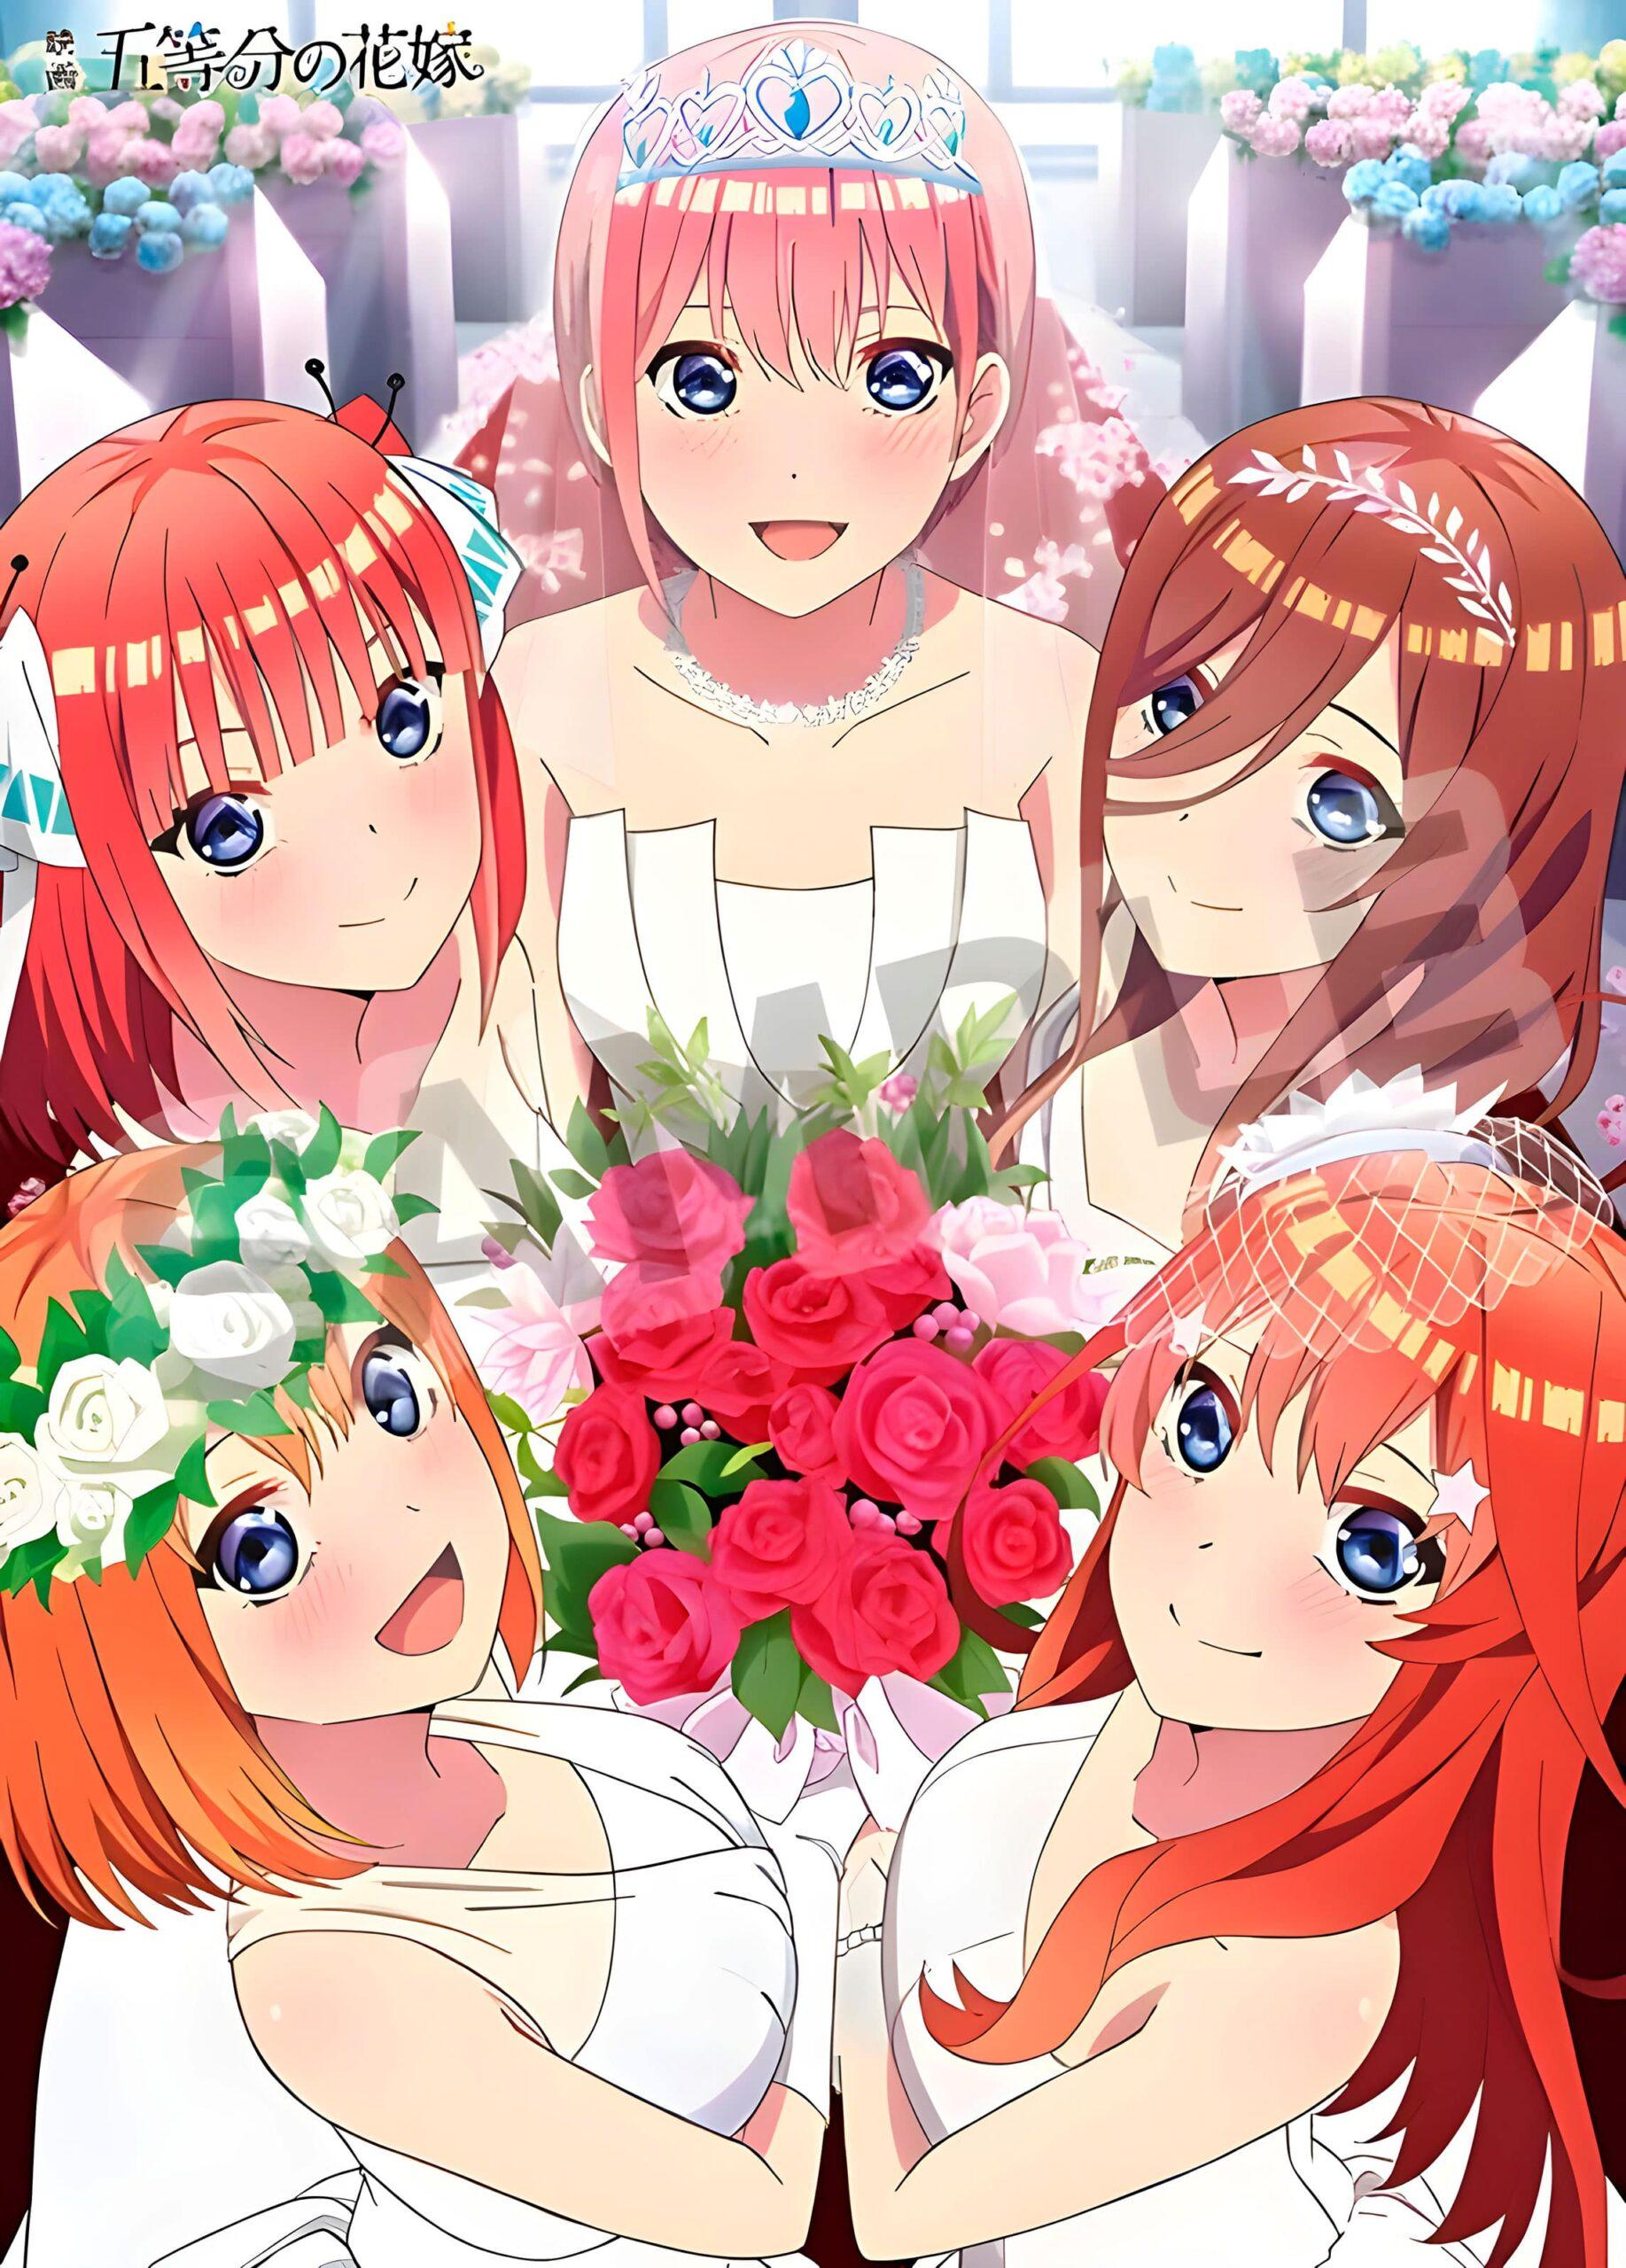 The Quintessential Quintuplets Film Screens in 91 Additional